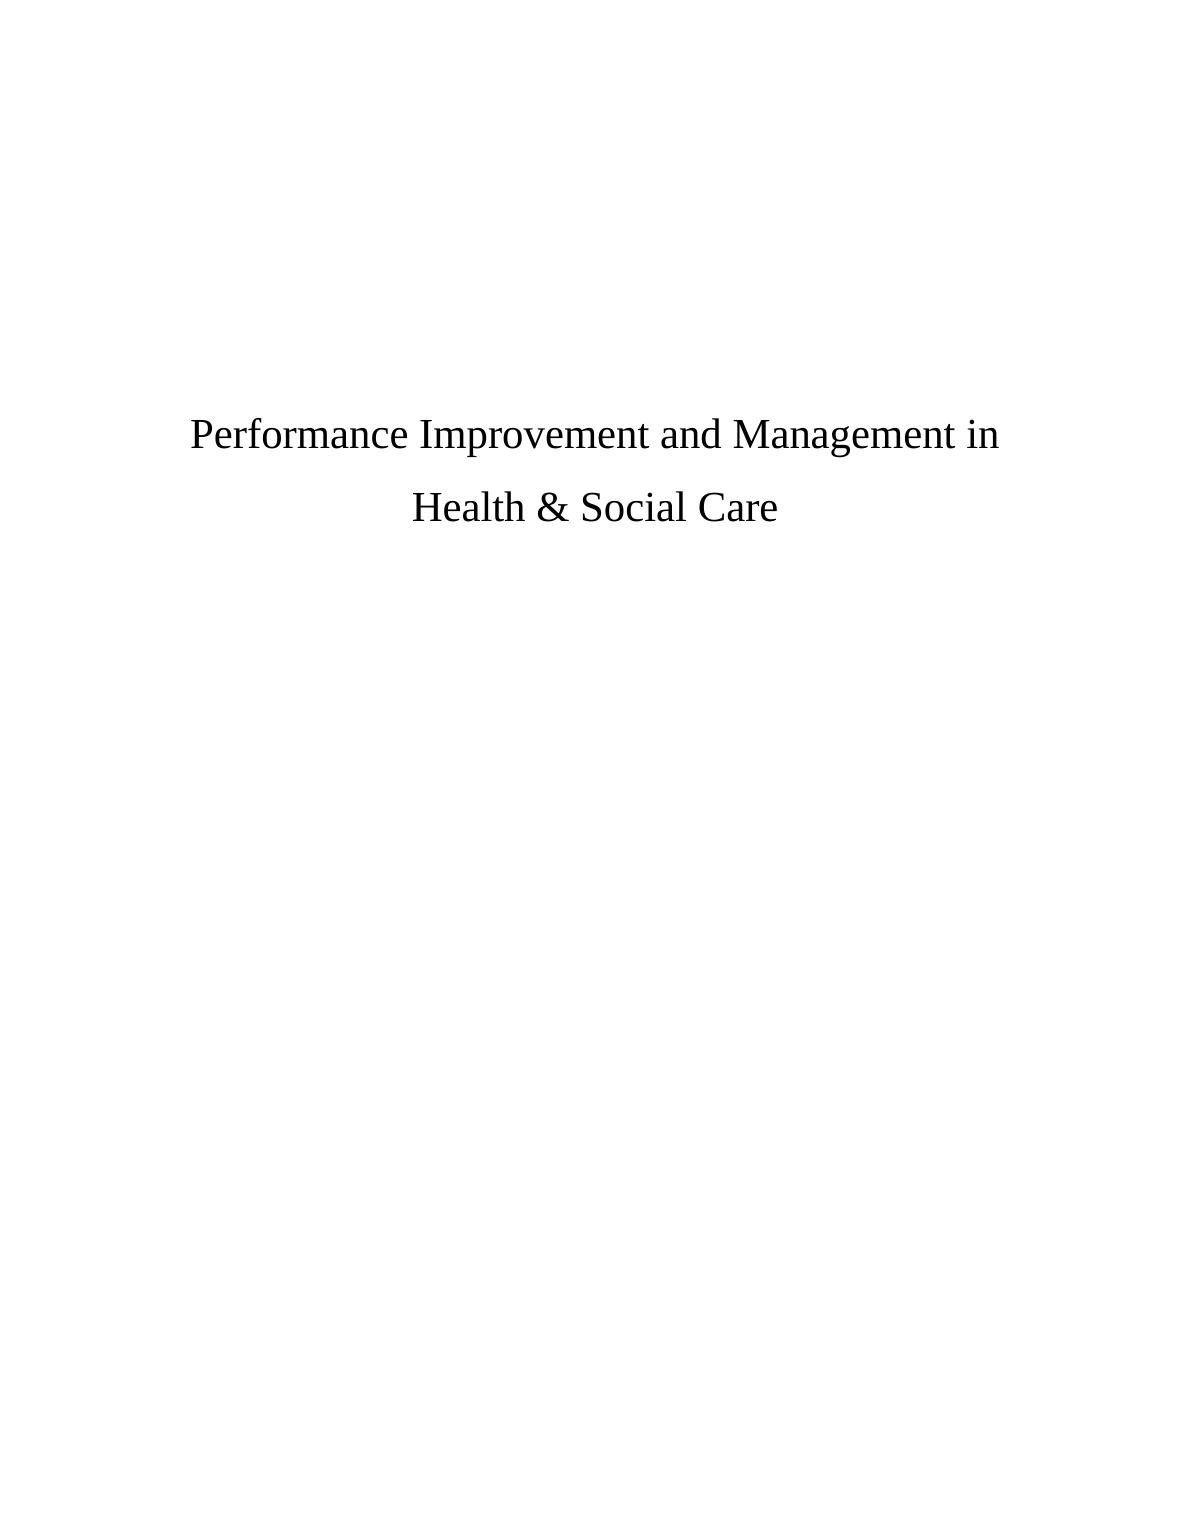 Performance Improvement and Management in Health & Social Care_1